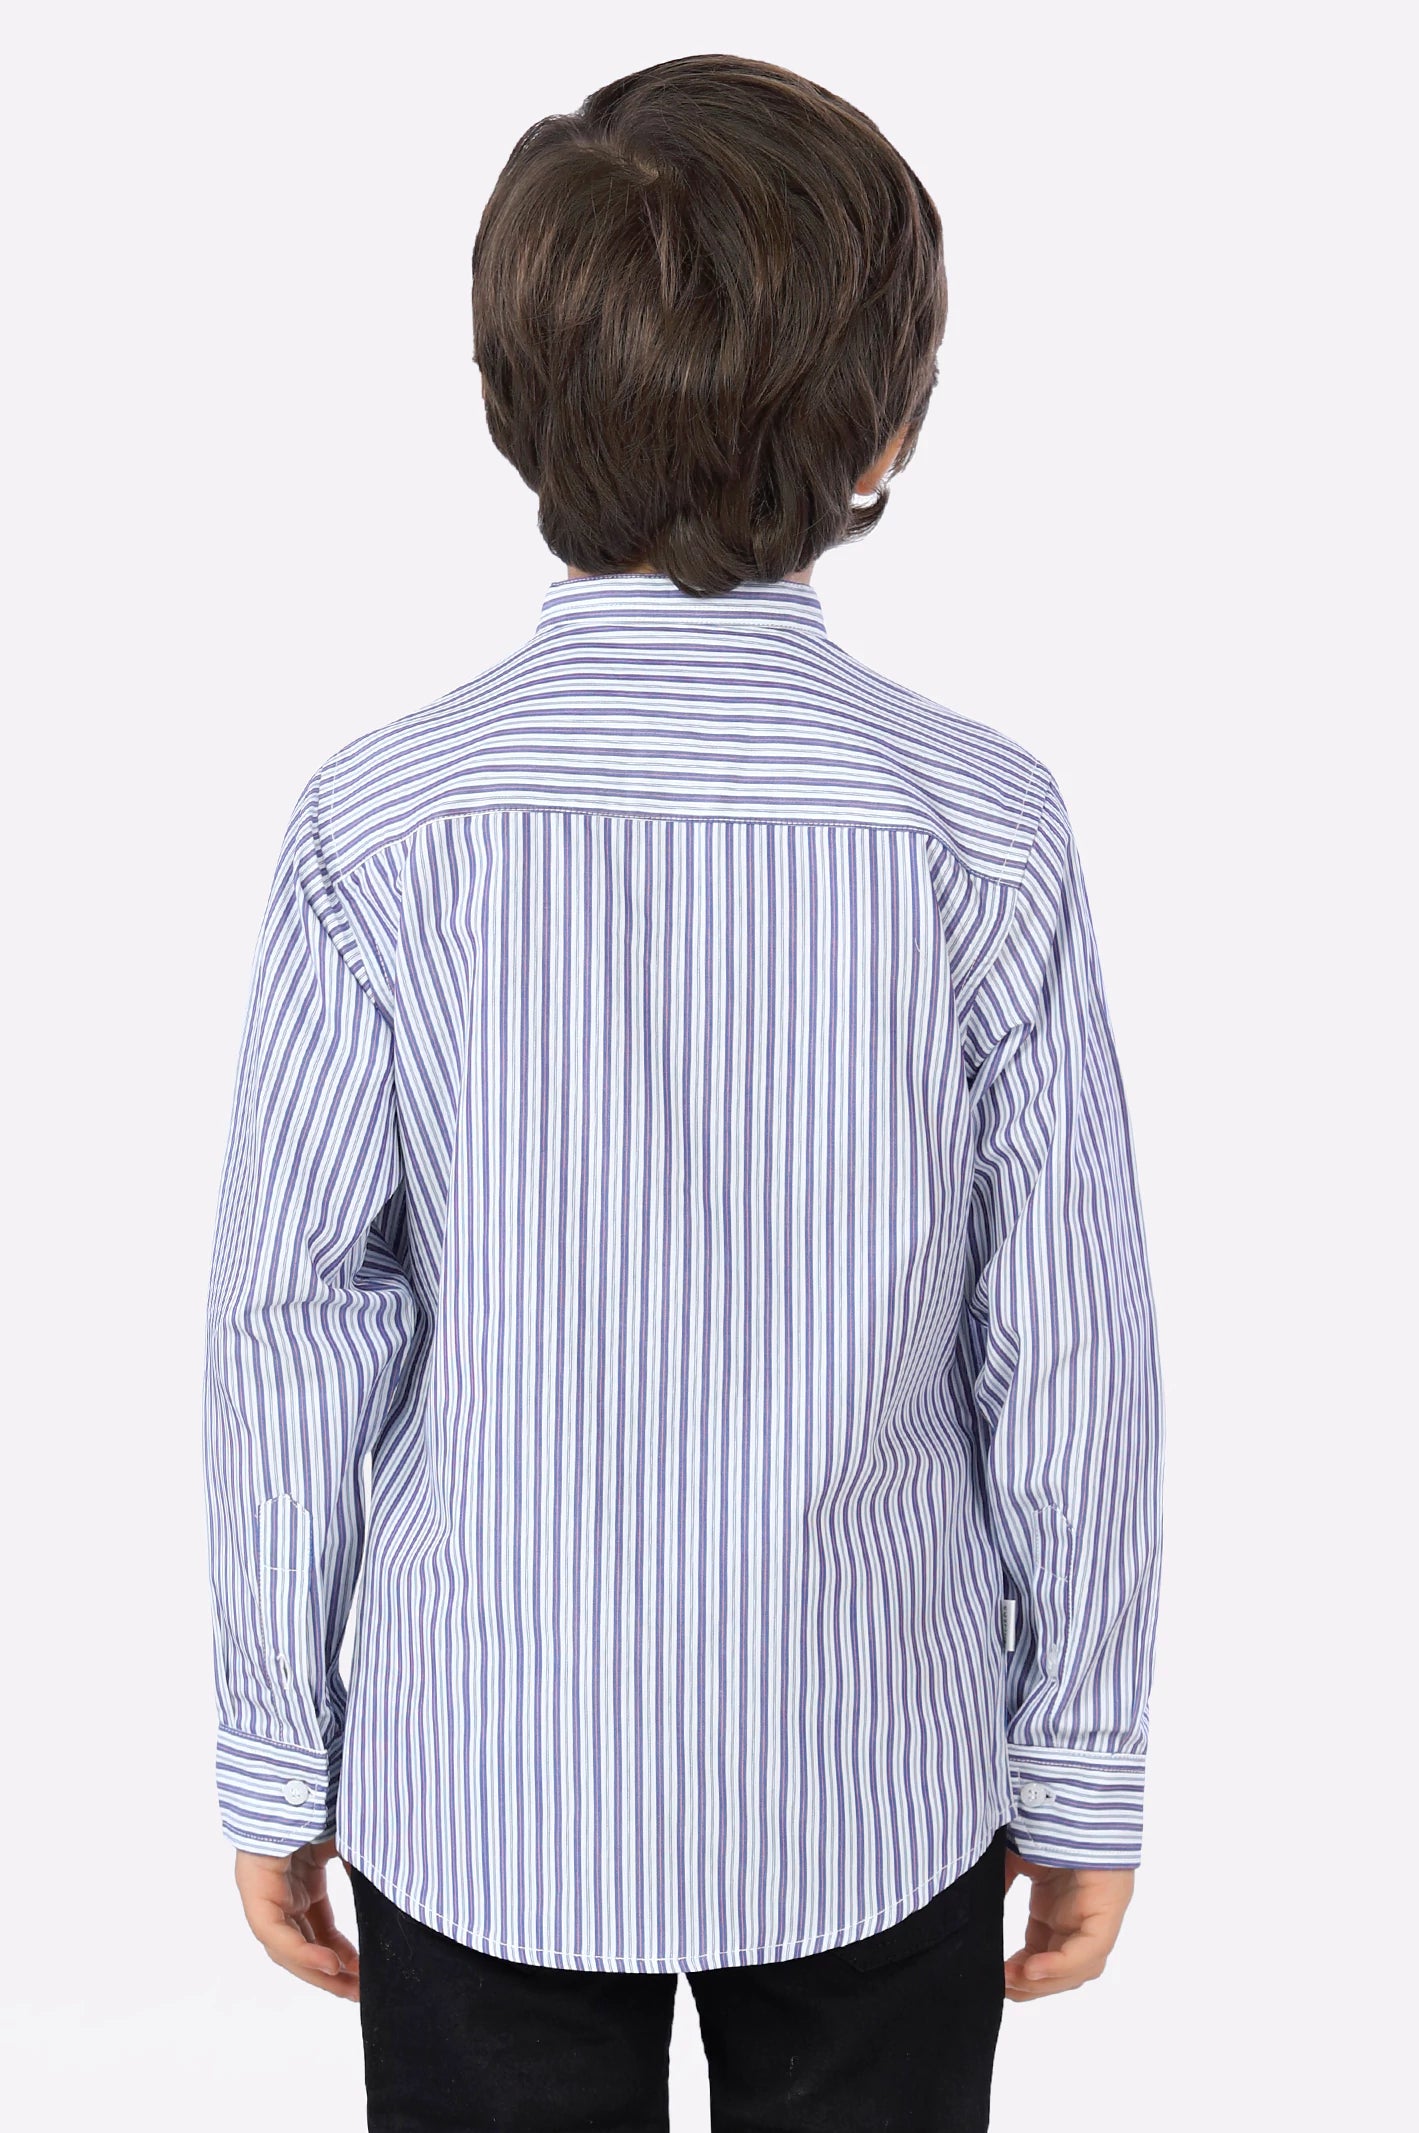 Multicolor Shadow Stripe Boys Shirt From Diners